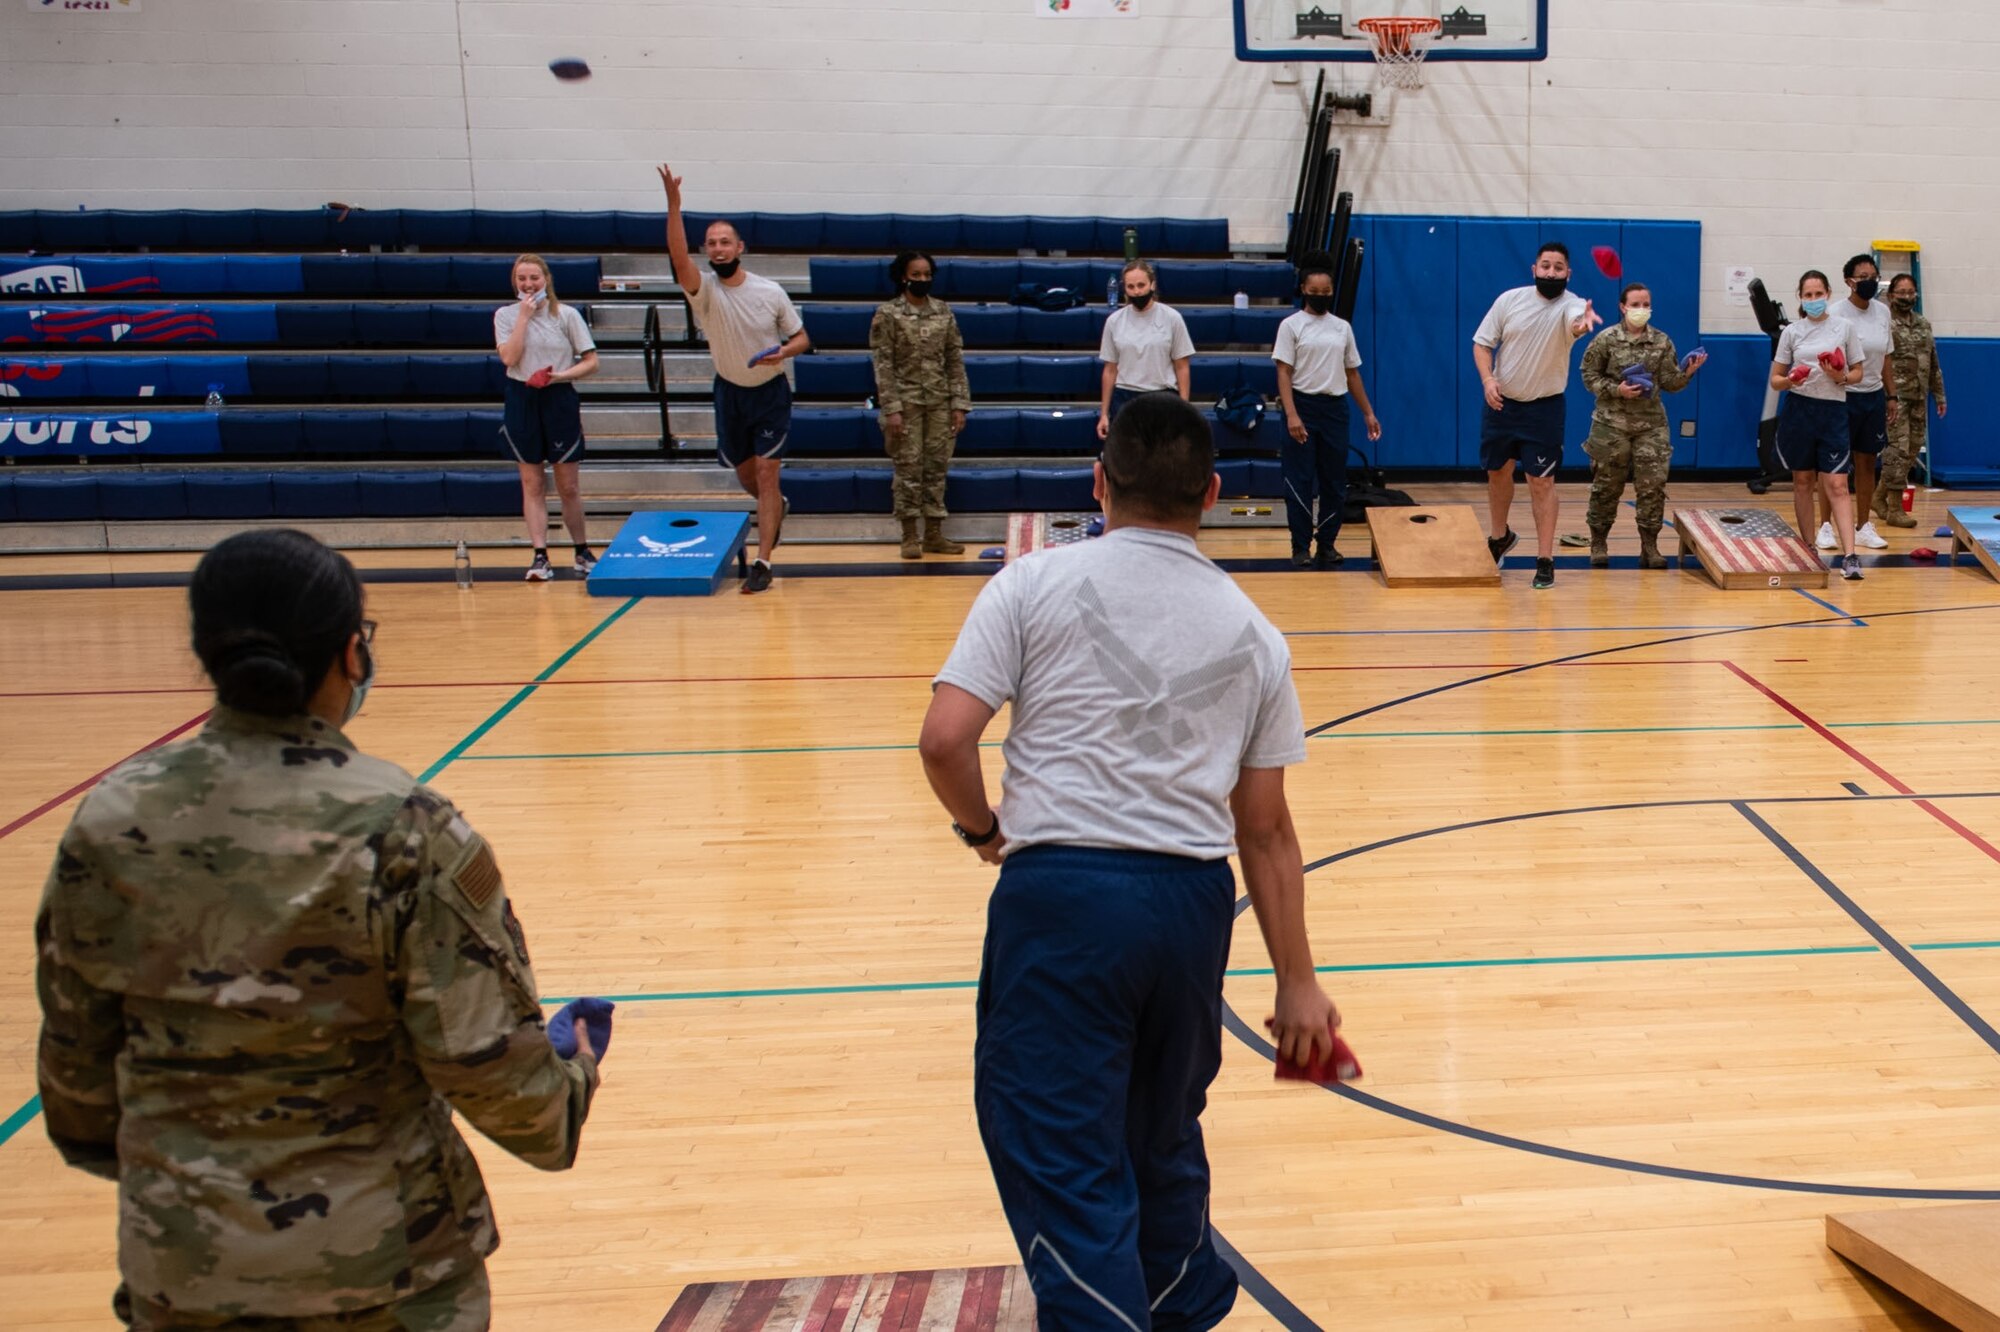 Members of the 932nd Medical Group participate in the corn hole activity during their annual sexual assault prevention and response/suicide prevention training, Scott Air Force Base, Illinois, Sept. 12, 2021. Each activity reviewed the training material, for example during the fit to fight activity a team of airman would be asked a training question and if answered correctly all other groups would do an exercise. (U.S. Air Force Photo by Staff Sgt. Brooke Spenner)